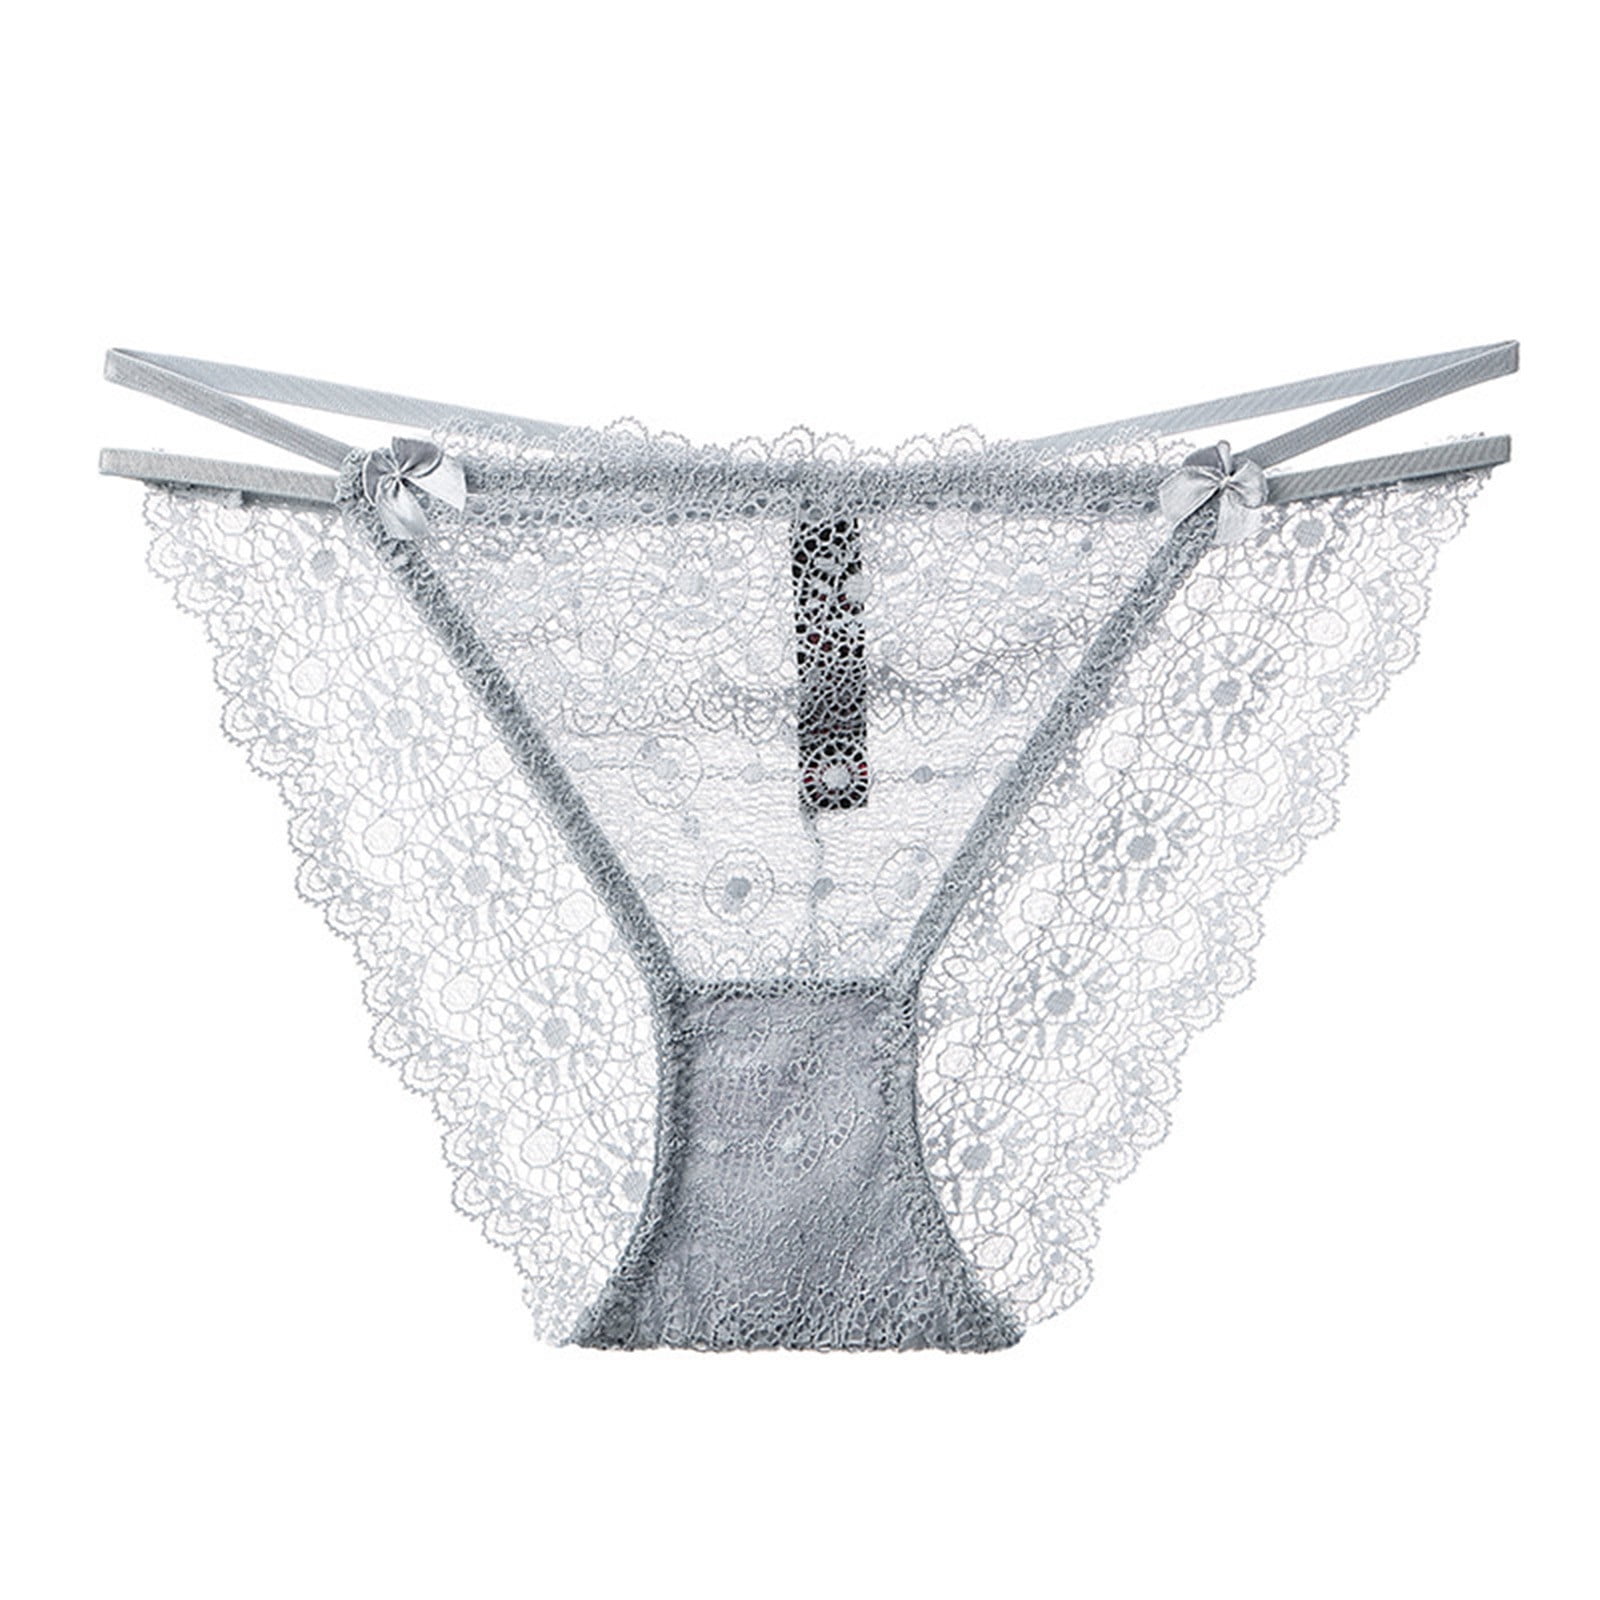 Womens Briefs Cage Back Bow Panties Cheeky Underwear,Sexy Lacy Underwear  Low Waist From Xlw2018, $3.05